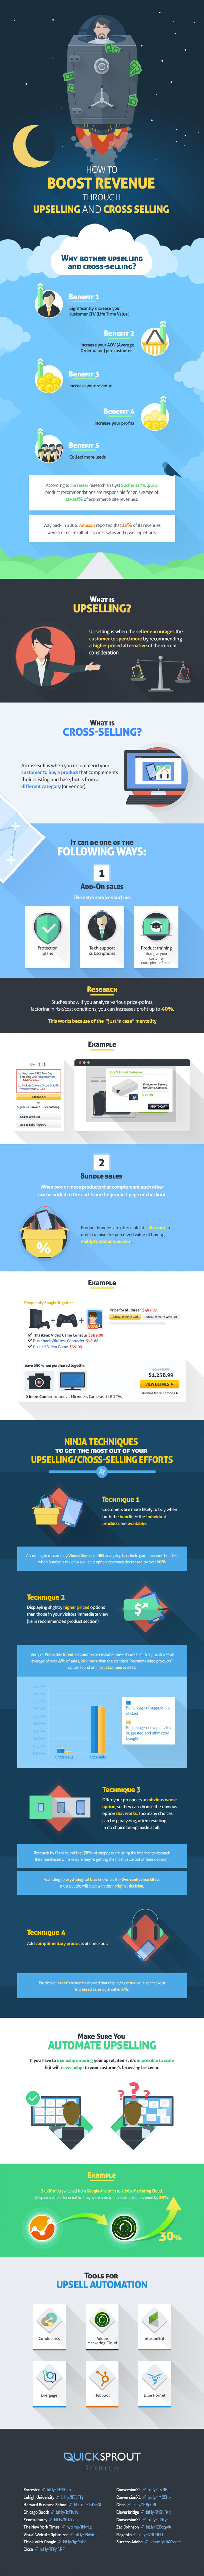 How to Boost Revenue Article 2015 Infographic